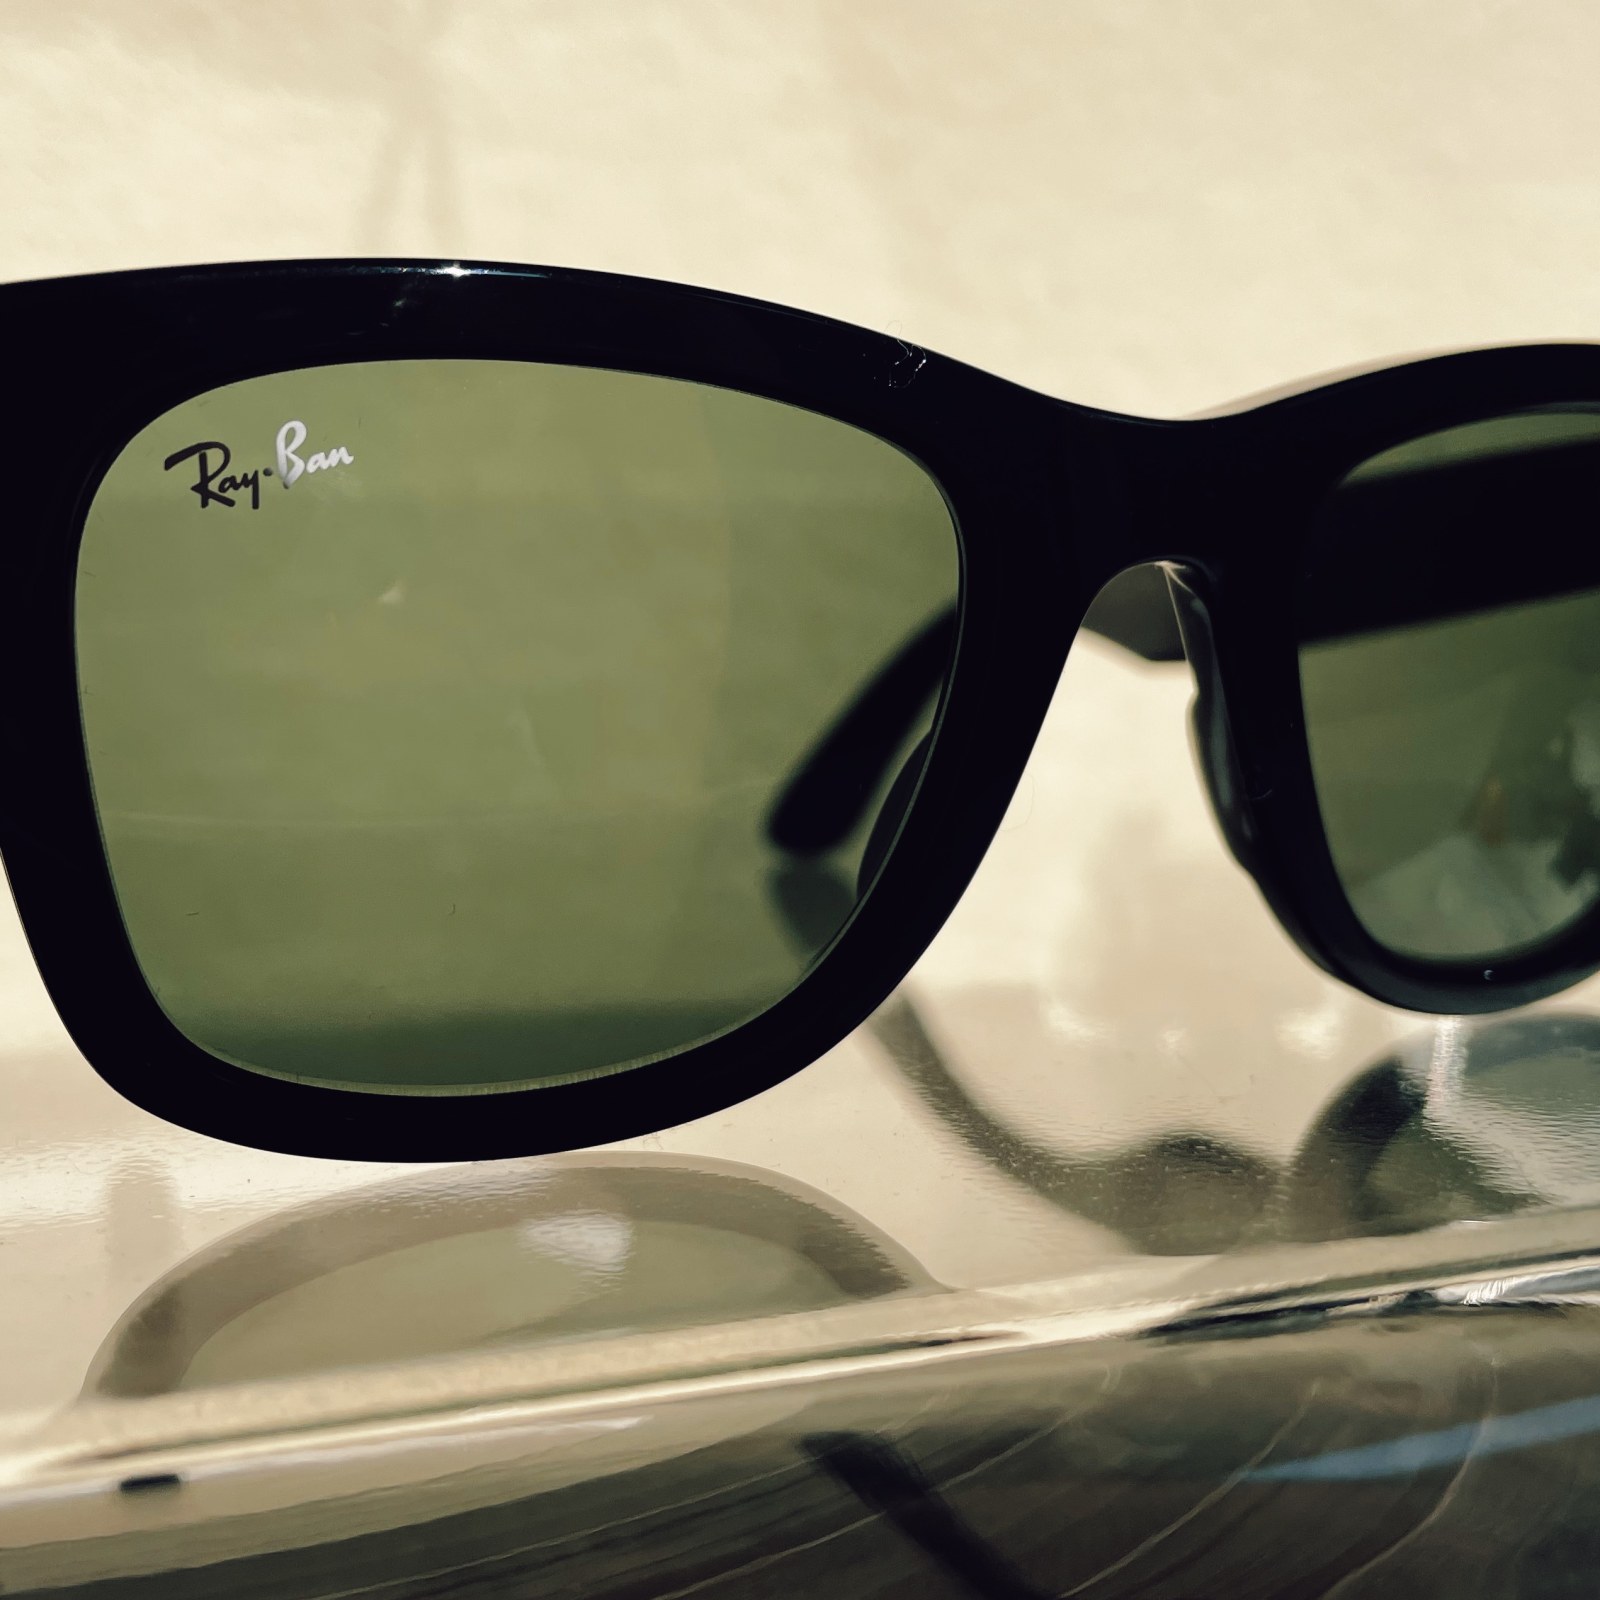 Ray-Ban Stories: Facebook's Camera Glasses Are The Start of Smart Glasses